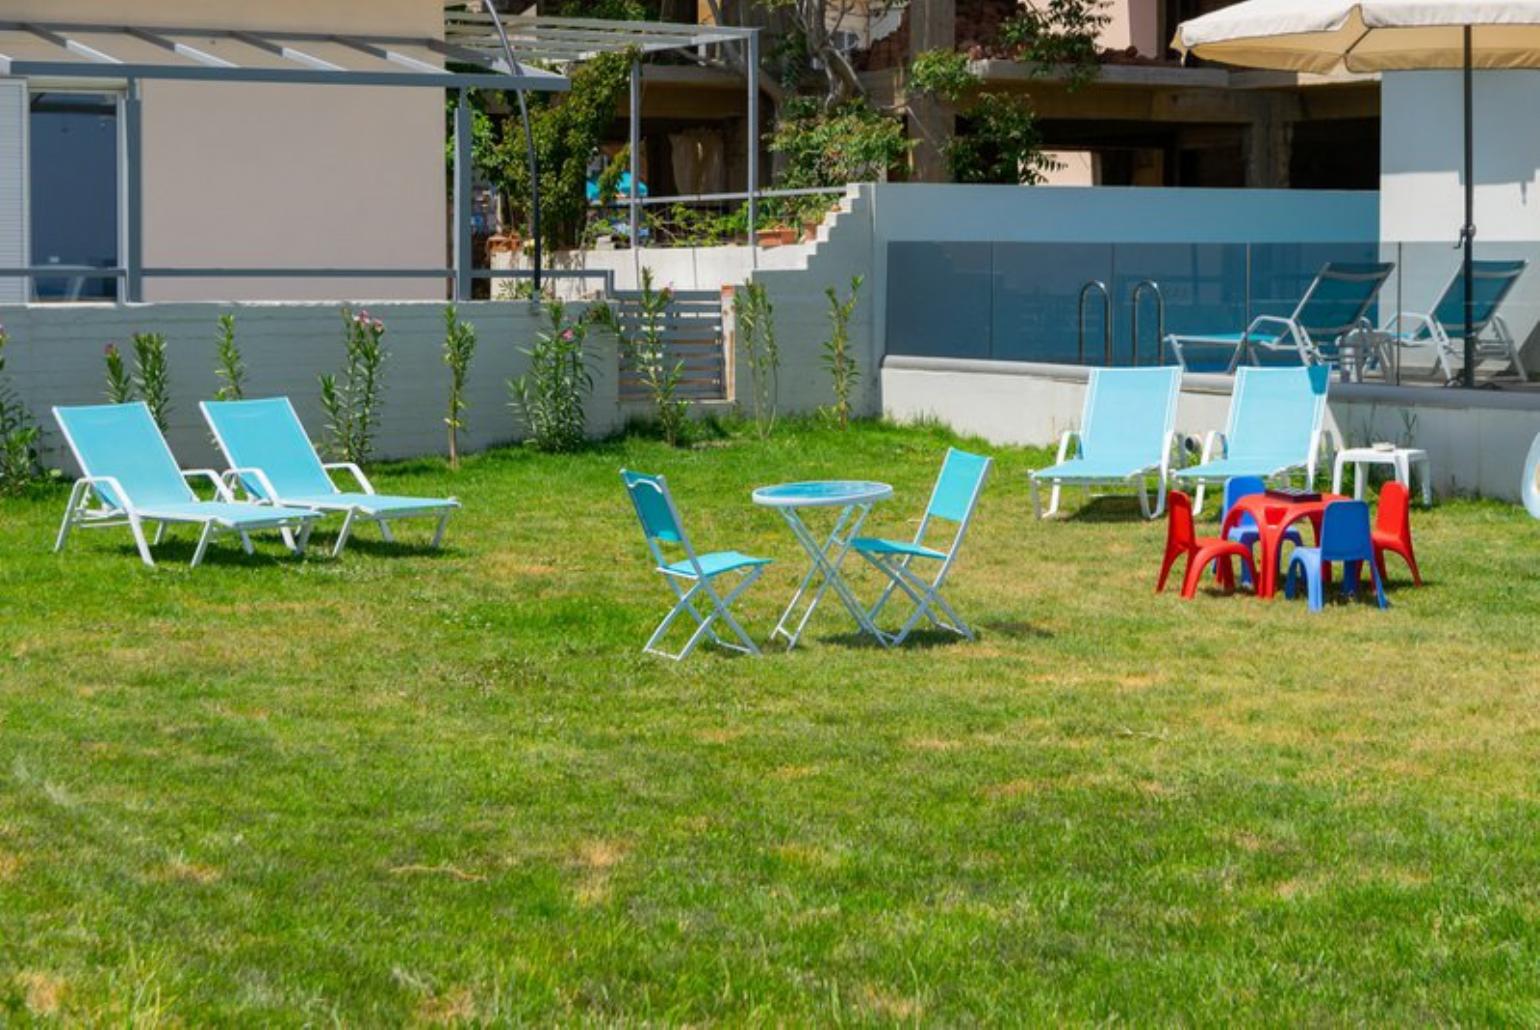 Outdoor area with sunbeds and playground